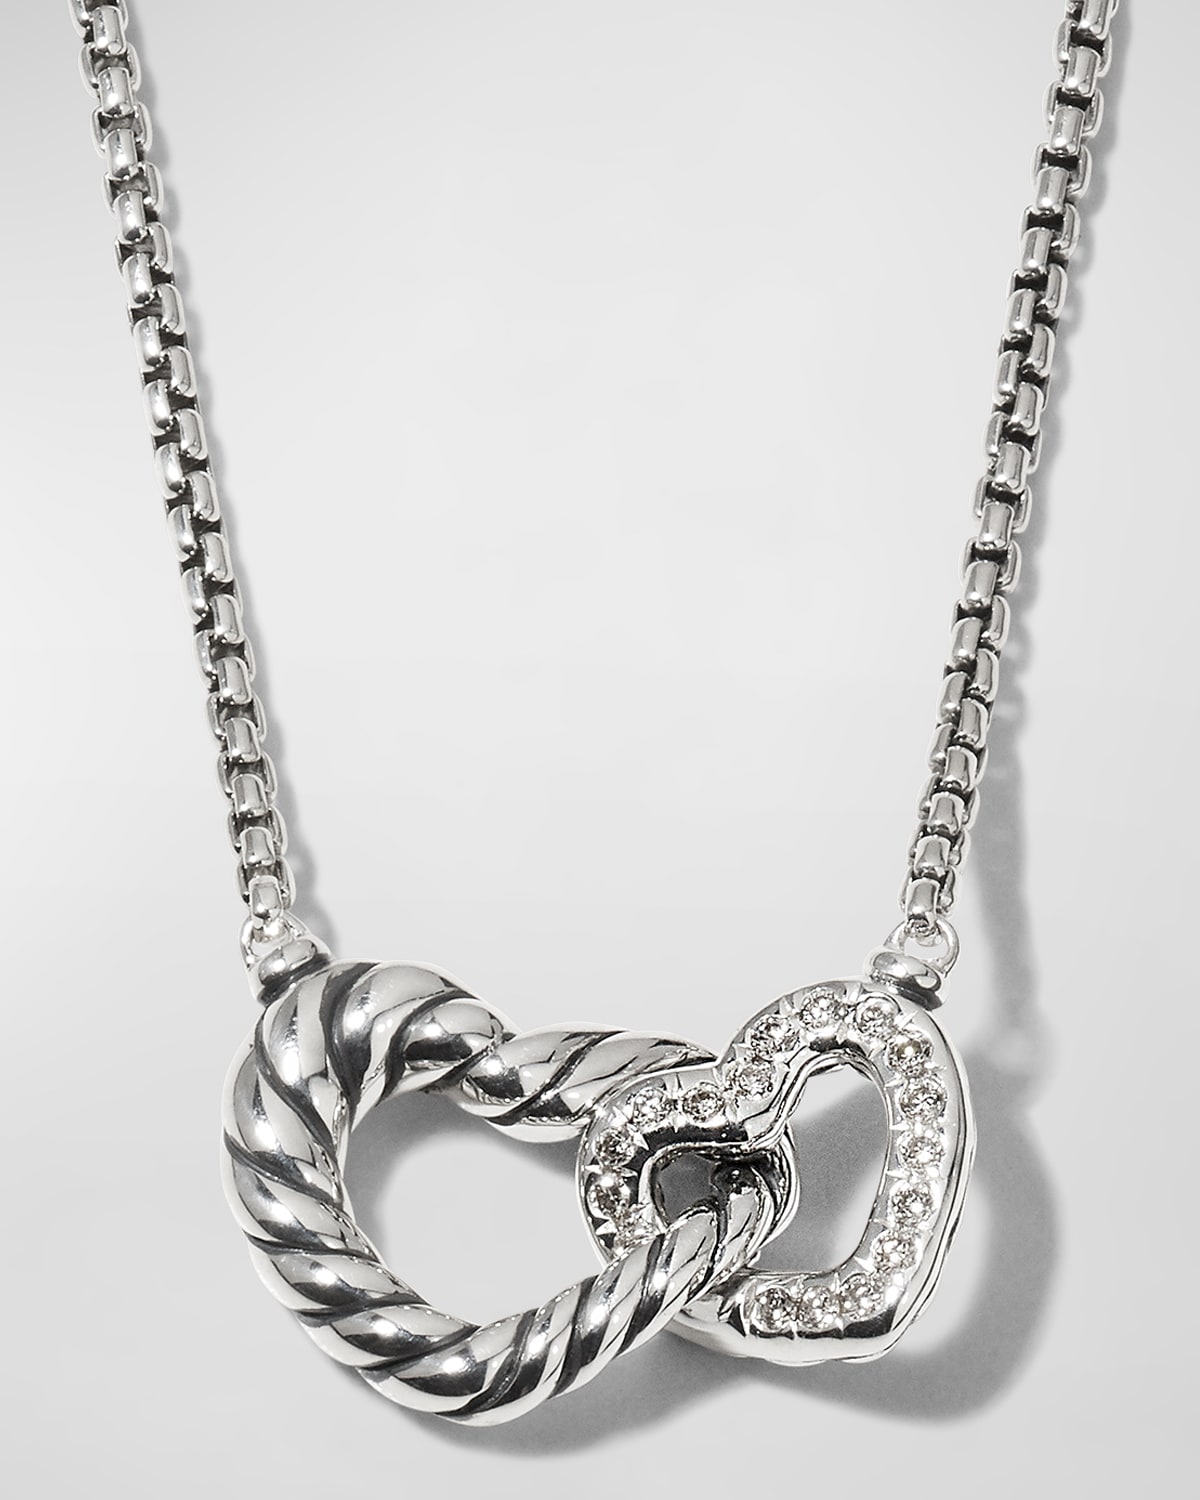 Double-Heart Necklace with Diamonds in Sterling Silver